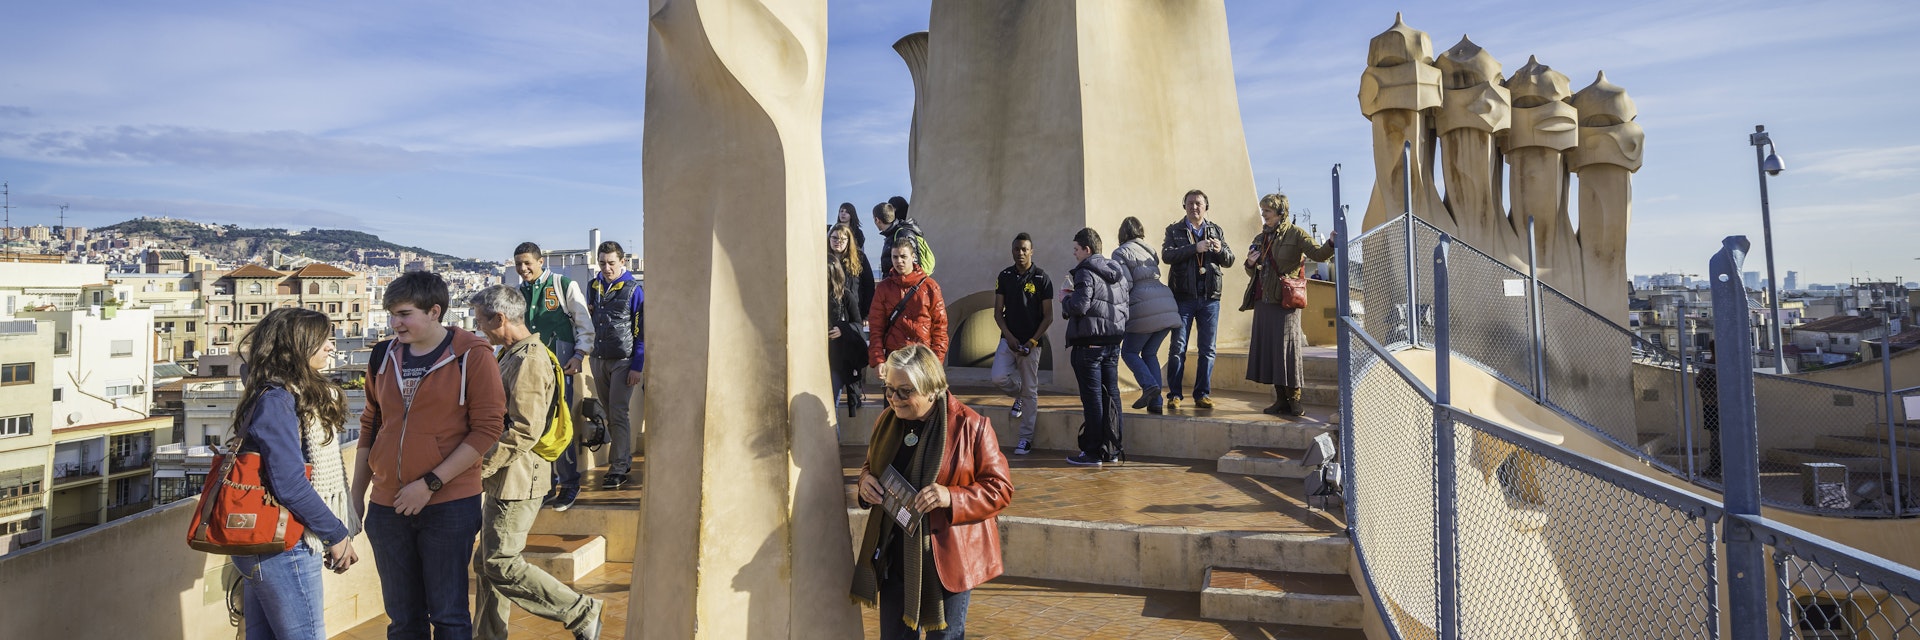 Barcelona, Spain - 14th February 2013: Tourists enjoying their visit to the rooftop of Casa Mila, La Pedrera, to see the iconic Gaudi chimneys that overlook the Sagrada Familia and the heart of downtown Barcelona, Spain.